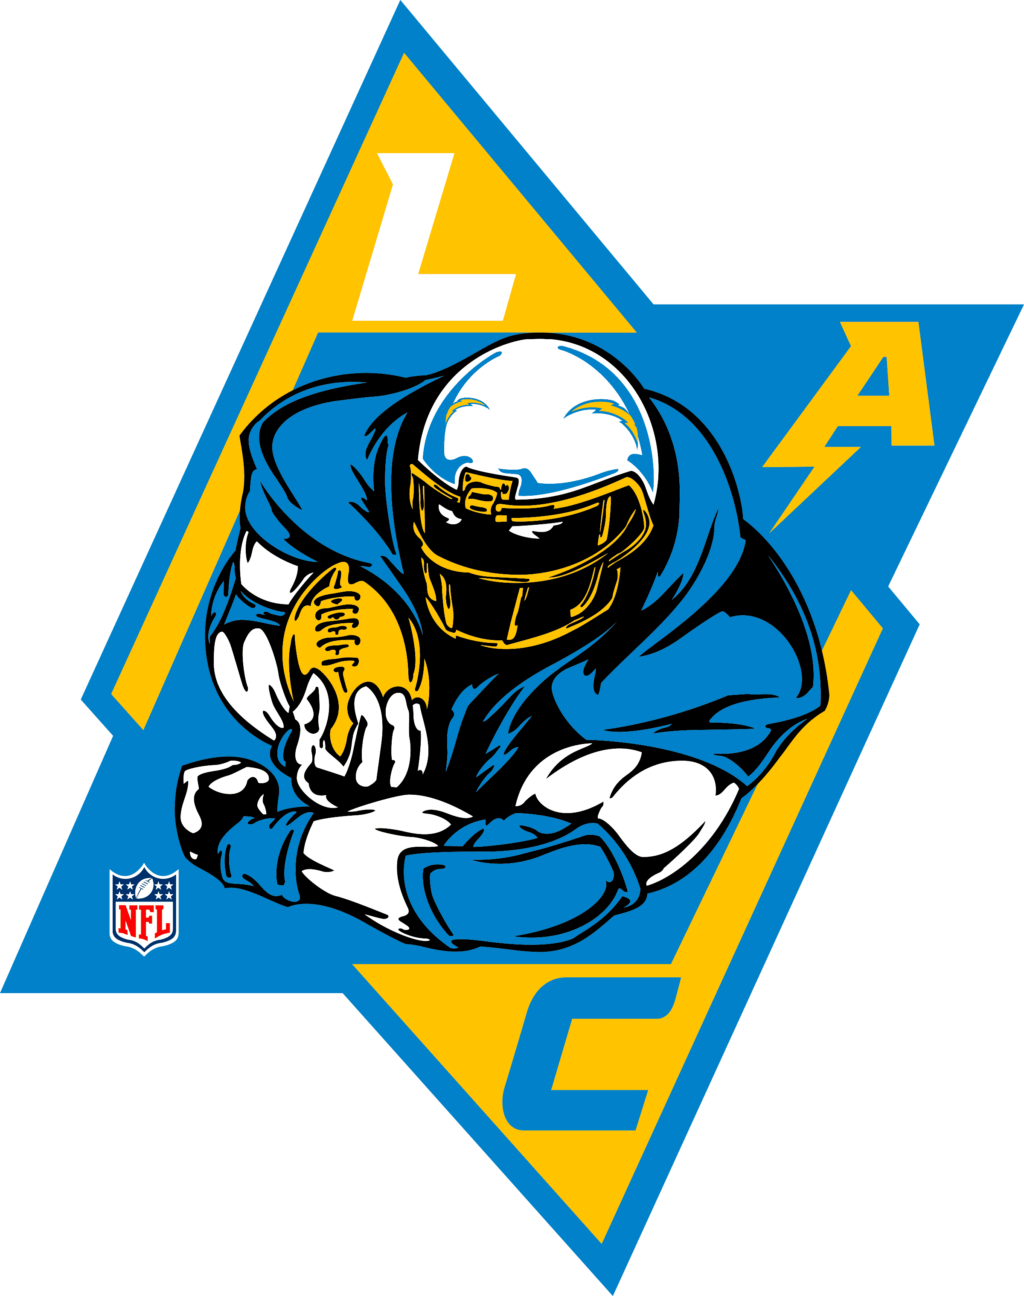 los angeles chargers 19 NFL Logo Los Angeles Chargers, Los Angeles Chargers SVG, Vector Los Angeles Chargers Clipart Los Angeles Chargers American Football Kit Los Angeles Chargers, SVG, DXF, PNG, American Football Logo Vector Los Angeles Chargers EPS download NFL-files for silhouette, Los Angeles Chargers files for clipping.